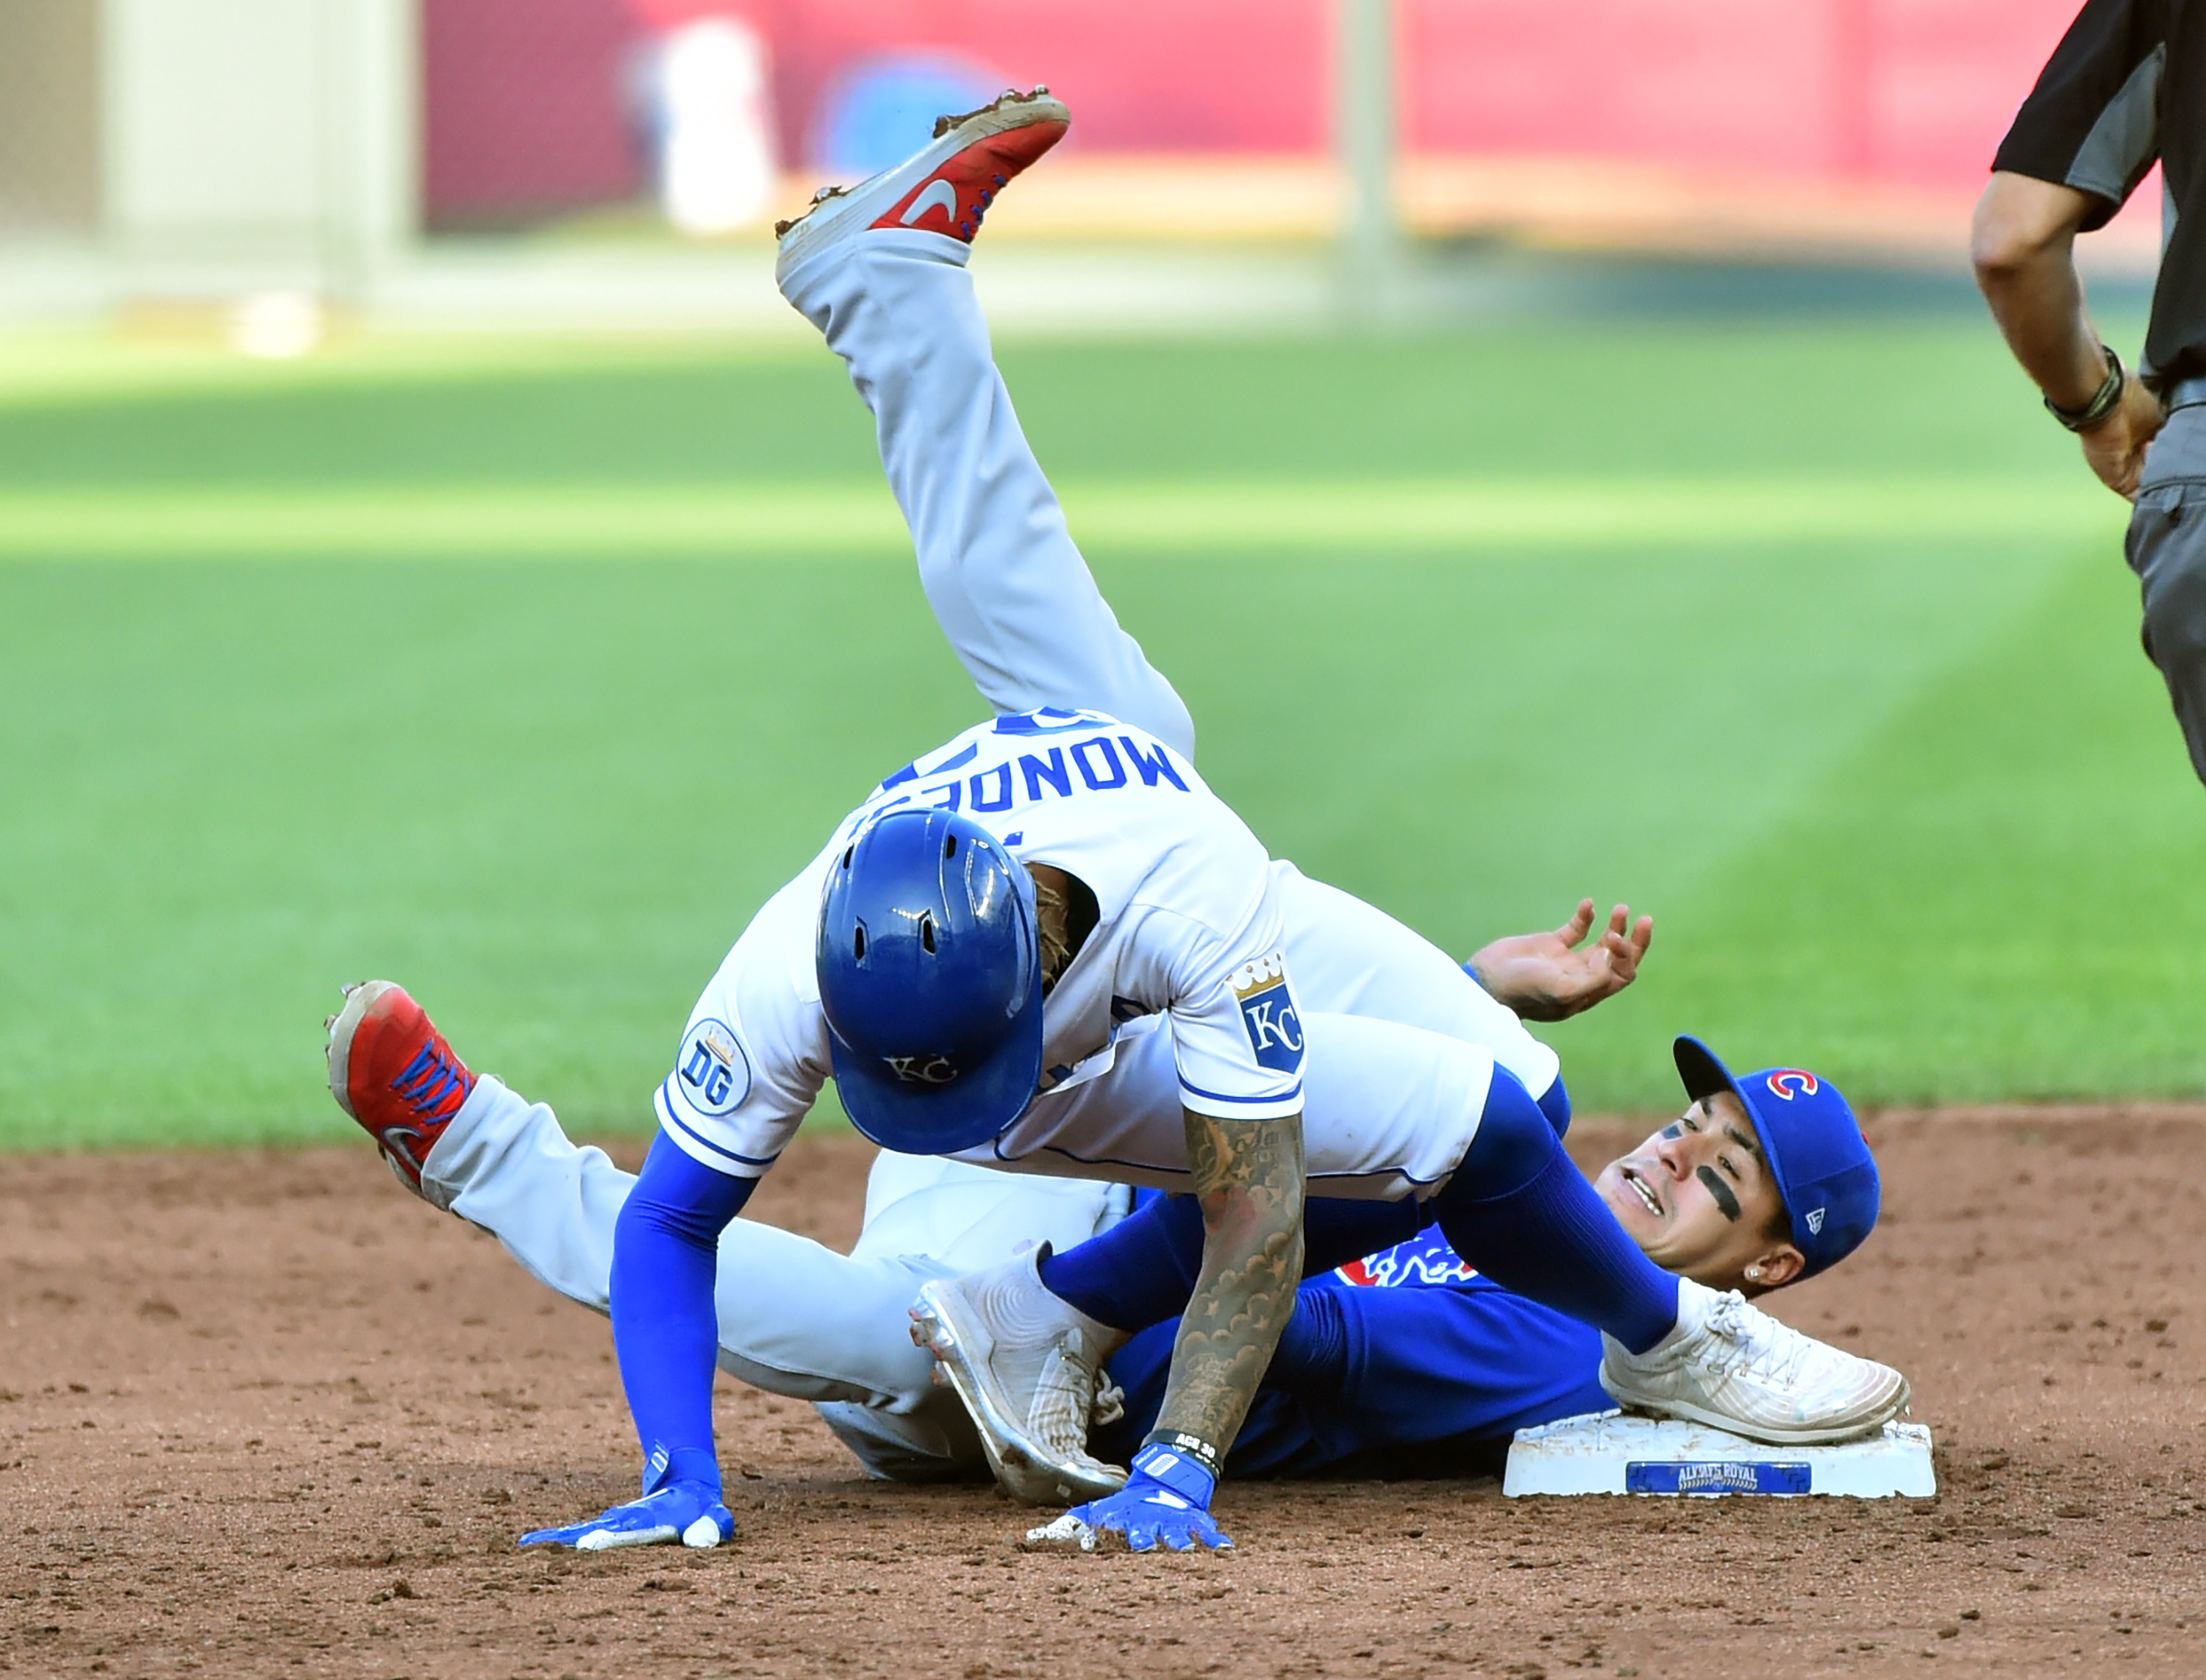 Adalberto Mondesi #27 of the Kansas City Royals slides into second for a double past the tage of Javier Baez #9 of the Chicago Cubs in the third inning at Kauffman Stadium on August 06, 2020 in Kansas City, Missouri.